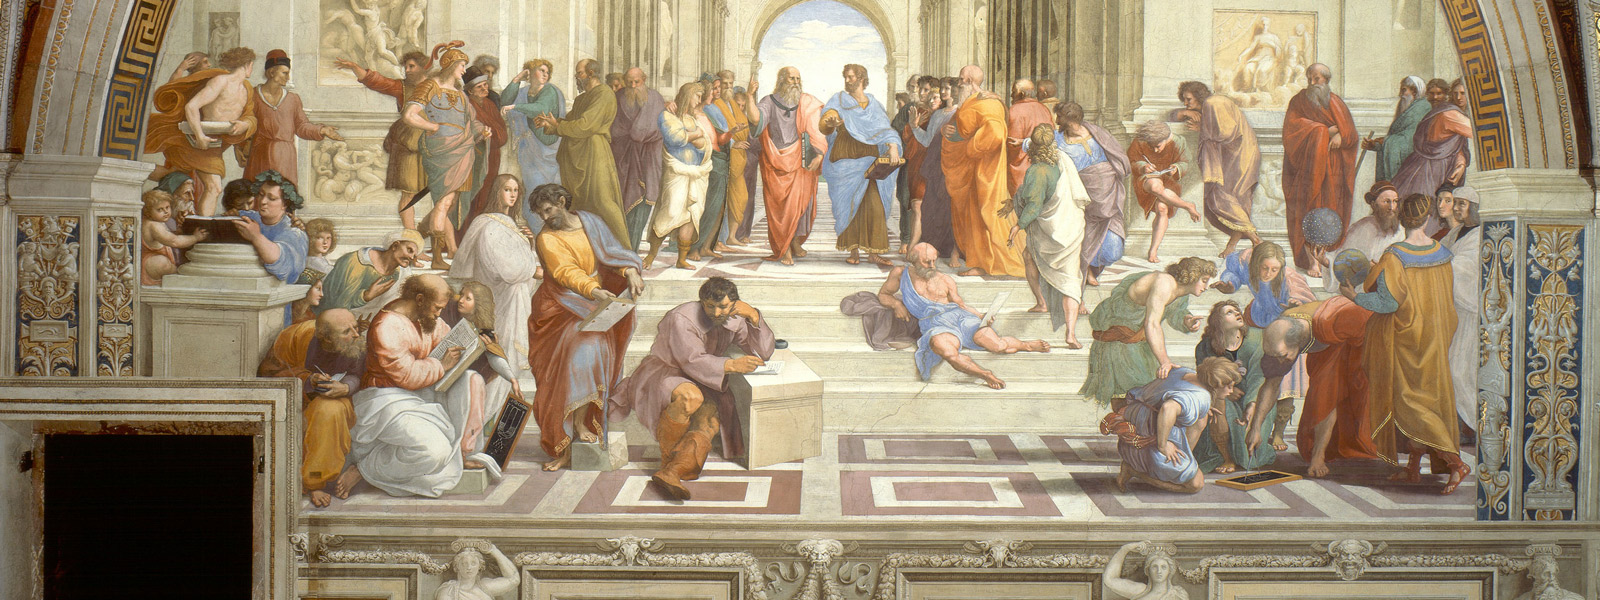 The School of Athens, by Raphael